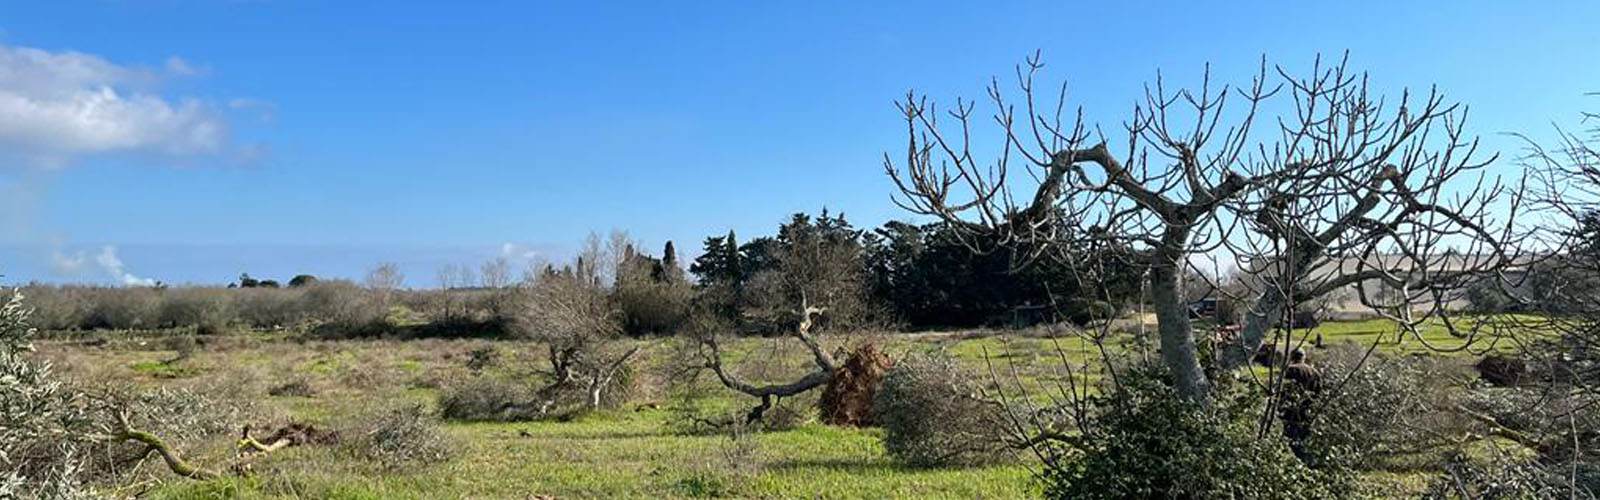 olive grove affected by Xylella